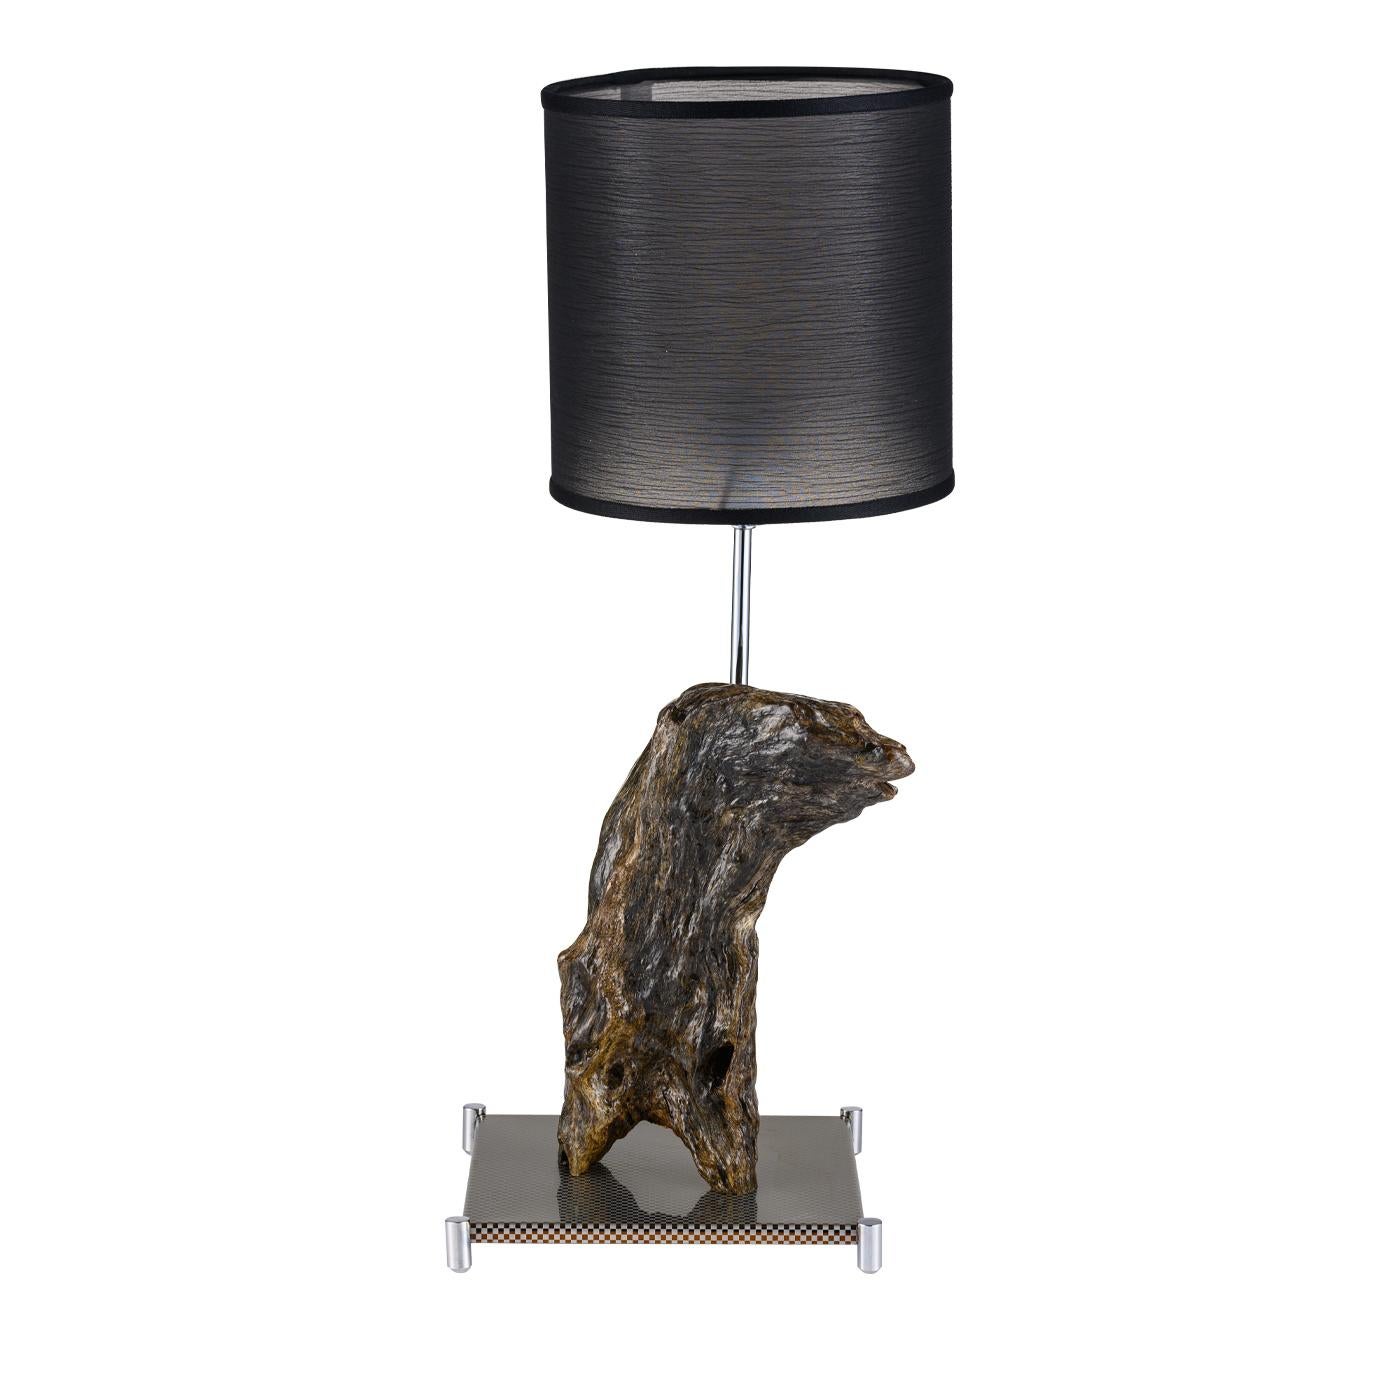 Set upon a base in reflective gold stainless steel with brass-gold feet, the Castoro lighting sculpture features a unique piece of washed-up sea wood, generally from the Amalfi Coast, placed aside a gold steel rod with fabric lampshade. The